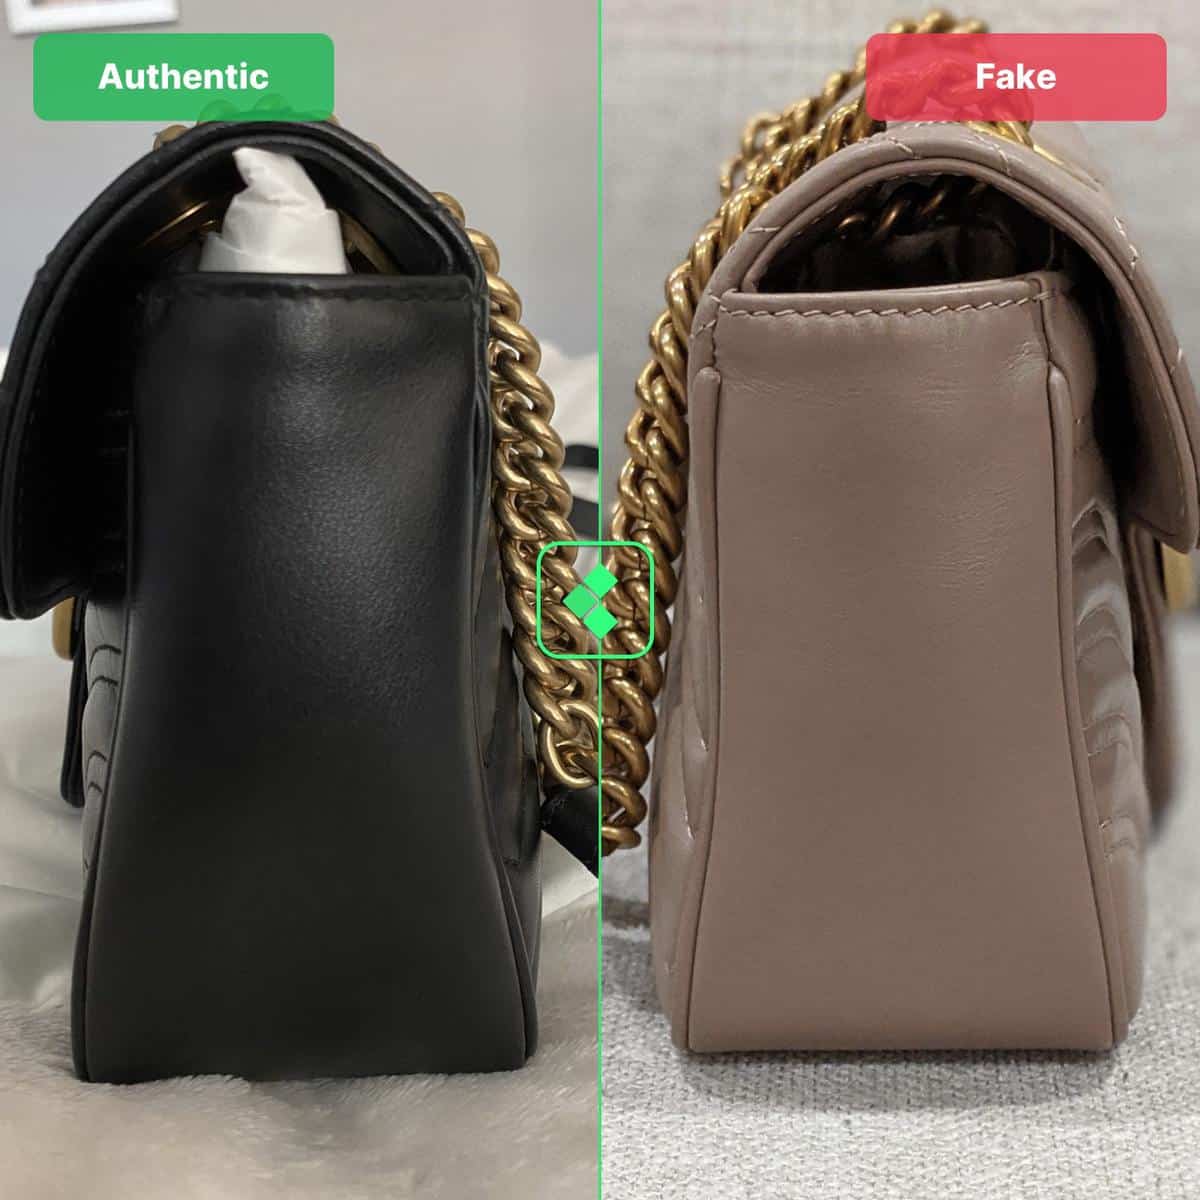 How To Spot Real Gucci GG Marmont Handbags, Belts & Shoes